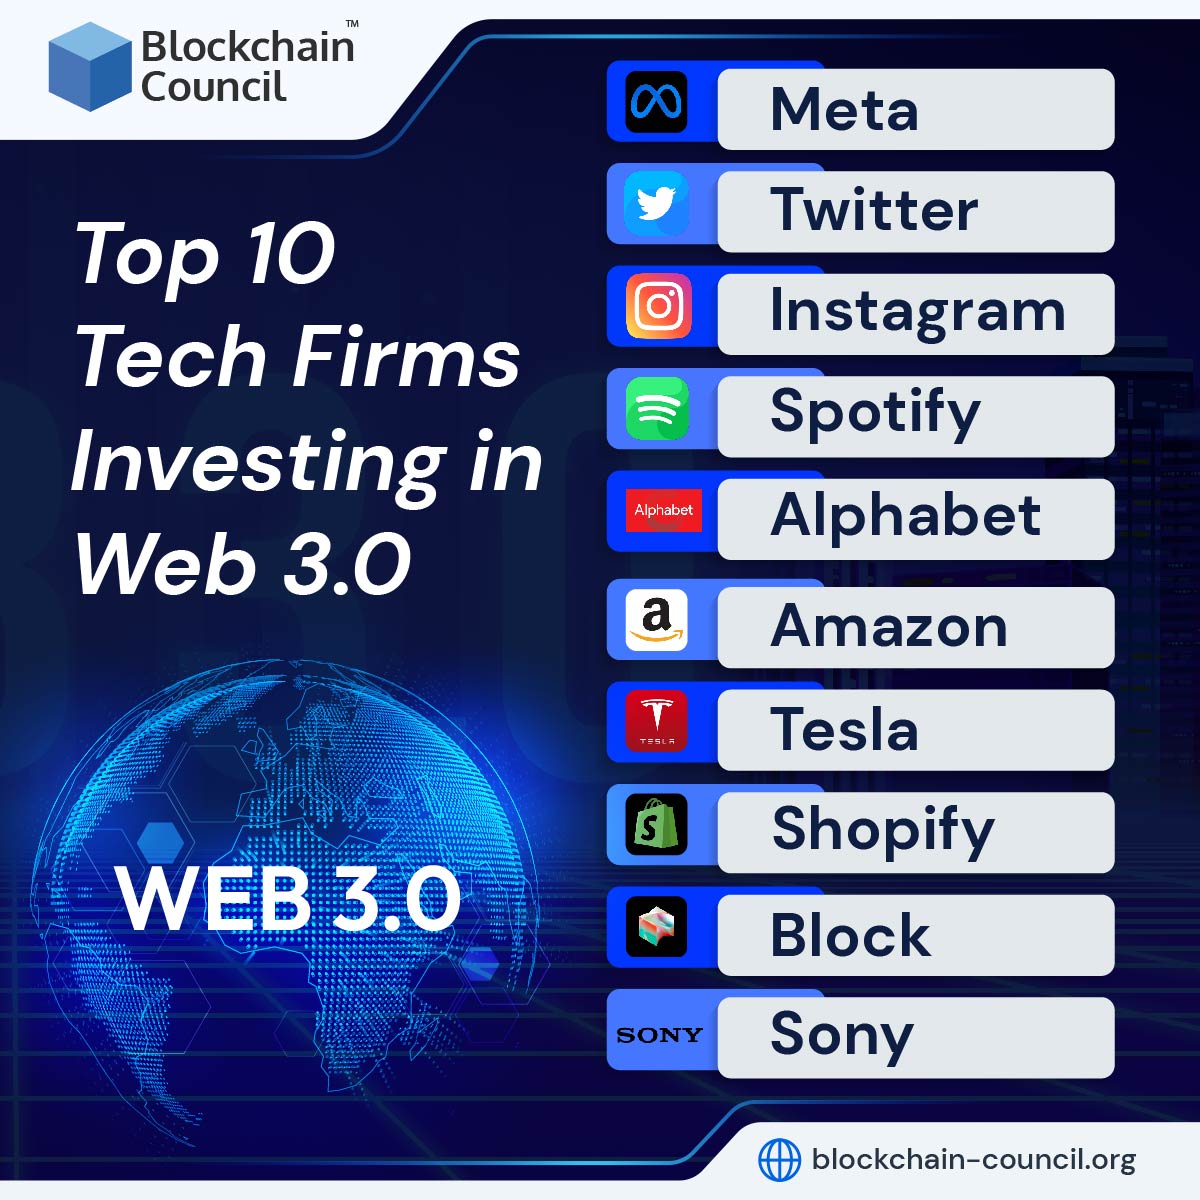 Top 10 Tech Firms Investing in Web 3.0